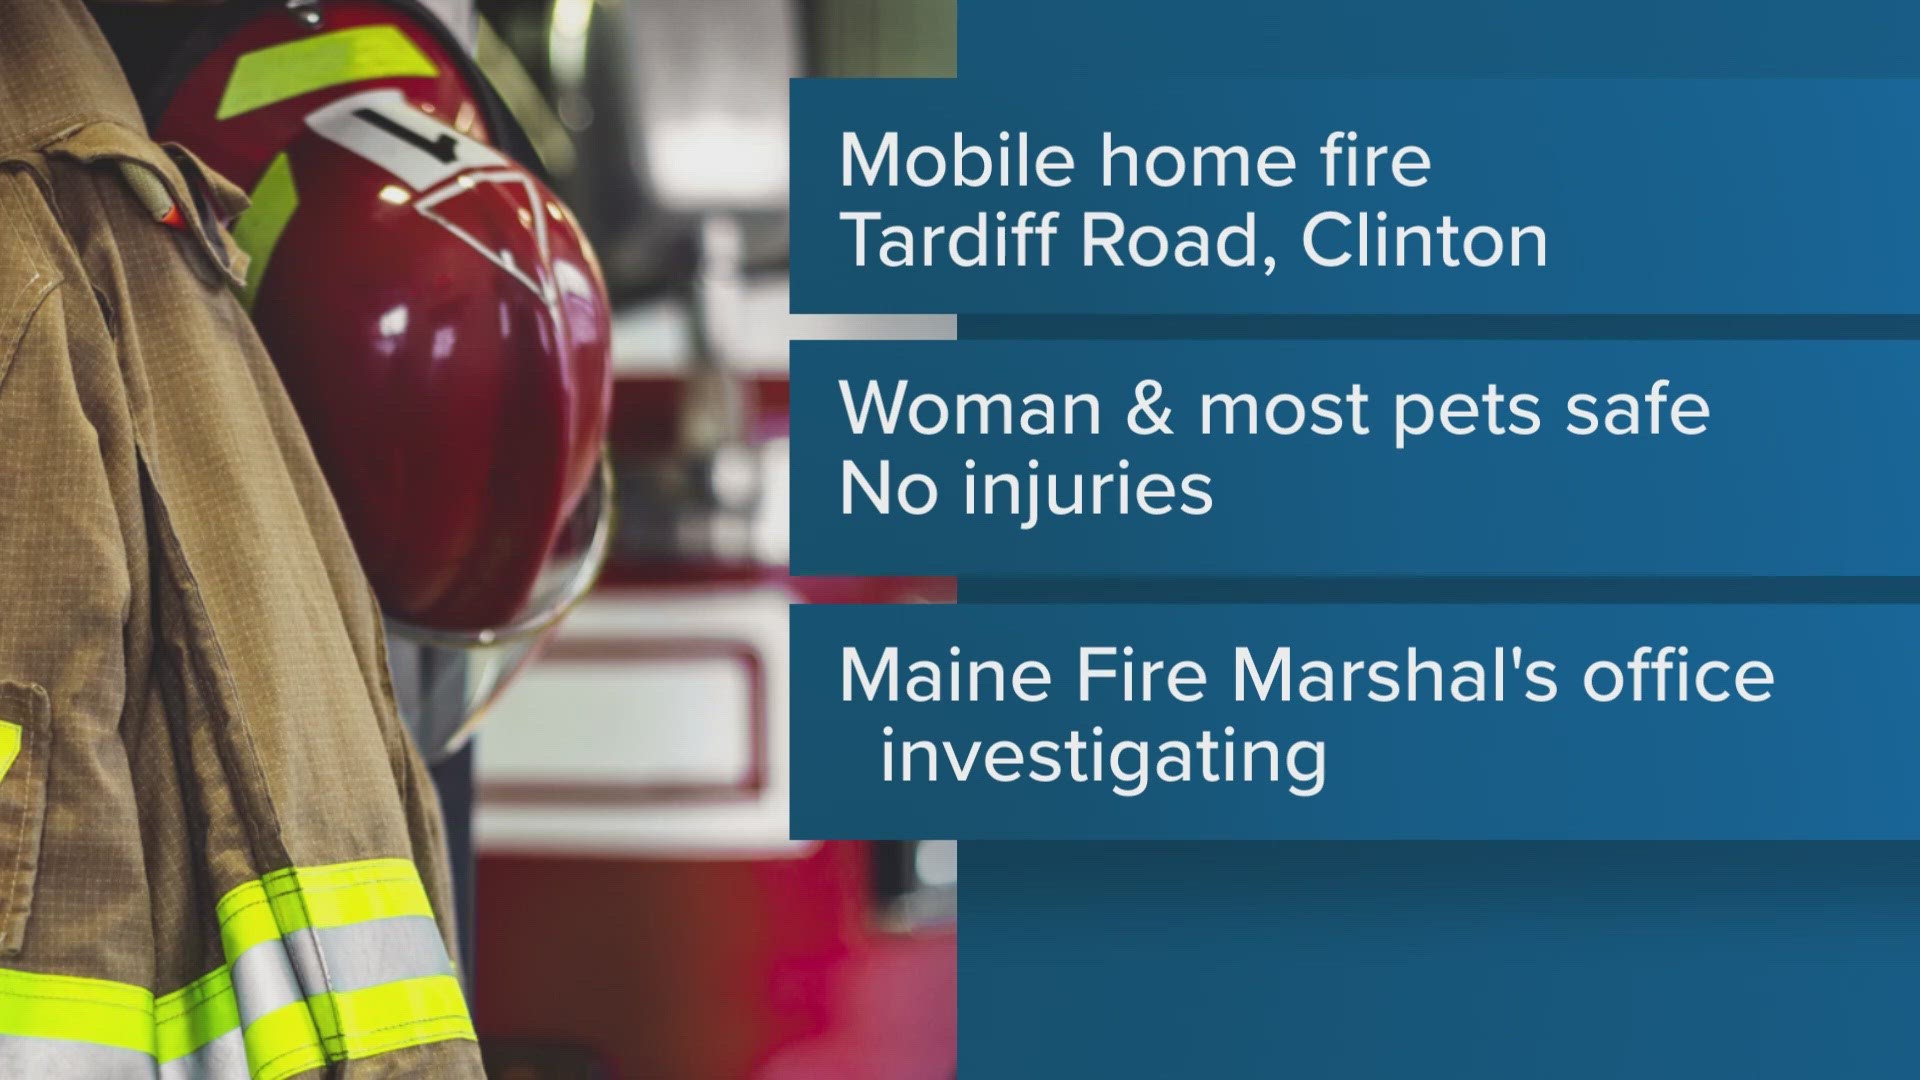 Clinton Fire Chief Travis Leary told NEWS CENTER Maine the call to 45 Tardiff Road came in around 7:20 a.m.